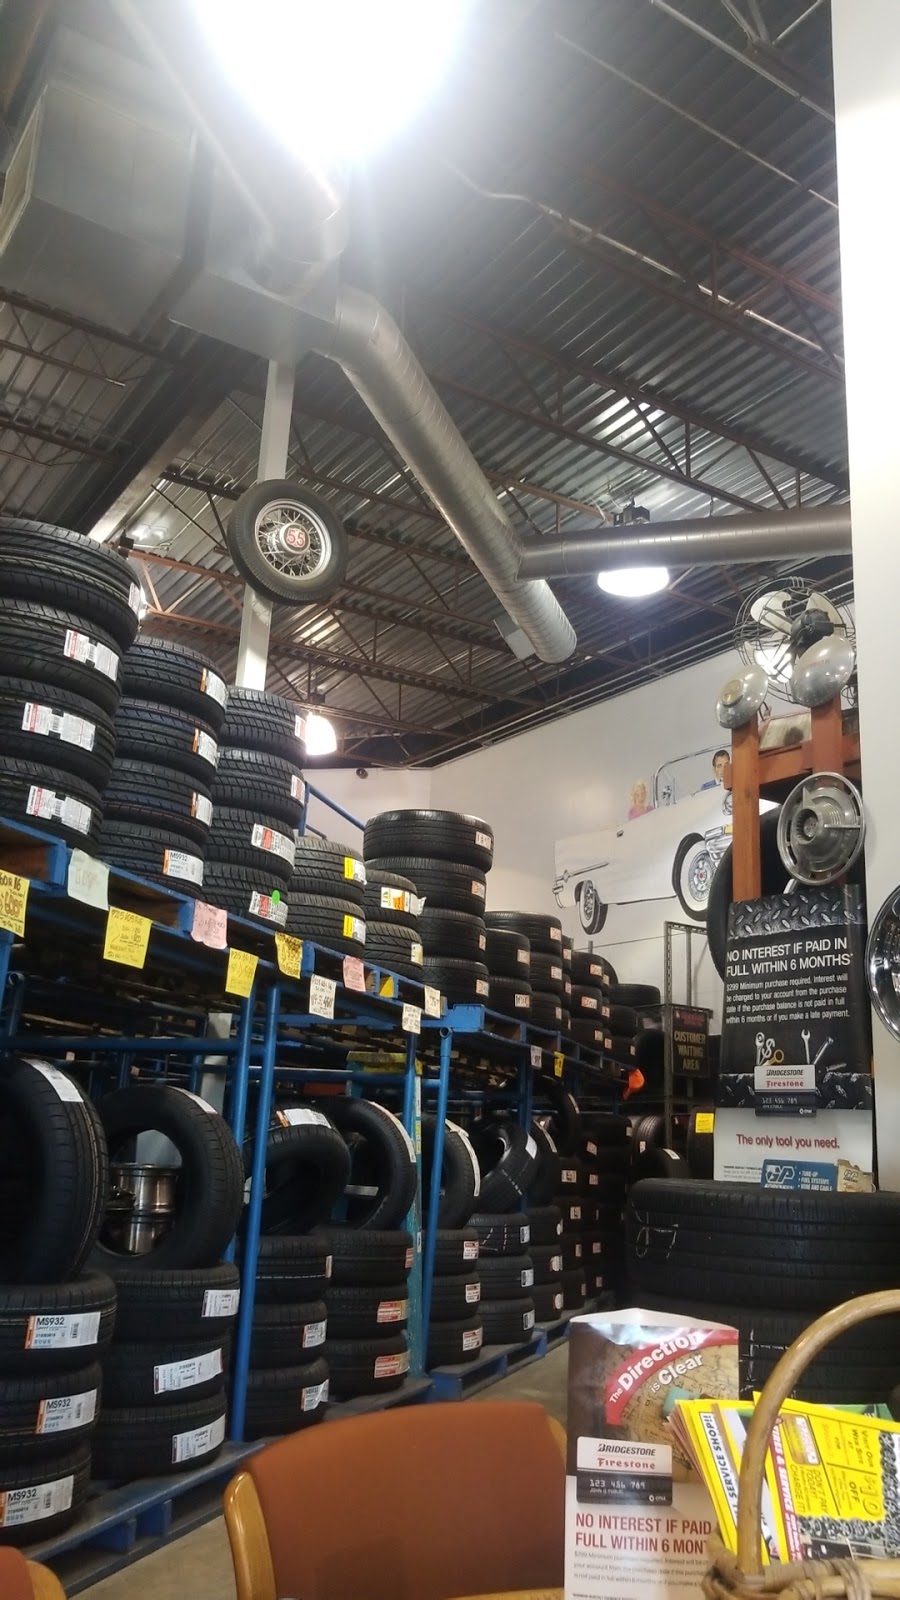 55 TIRES AND SERVICE | 4309 Butler Hill Rd, St. Louis, MO 63128 | Phone: (314) 416-8155